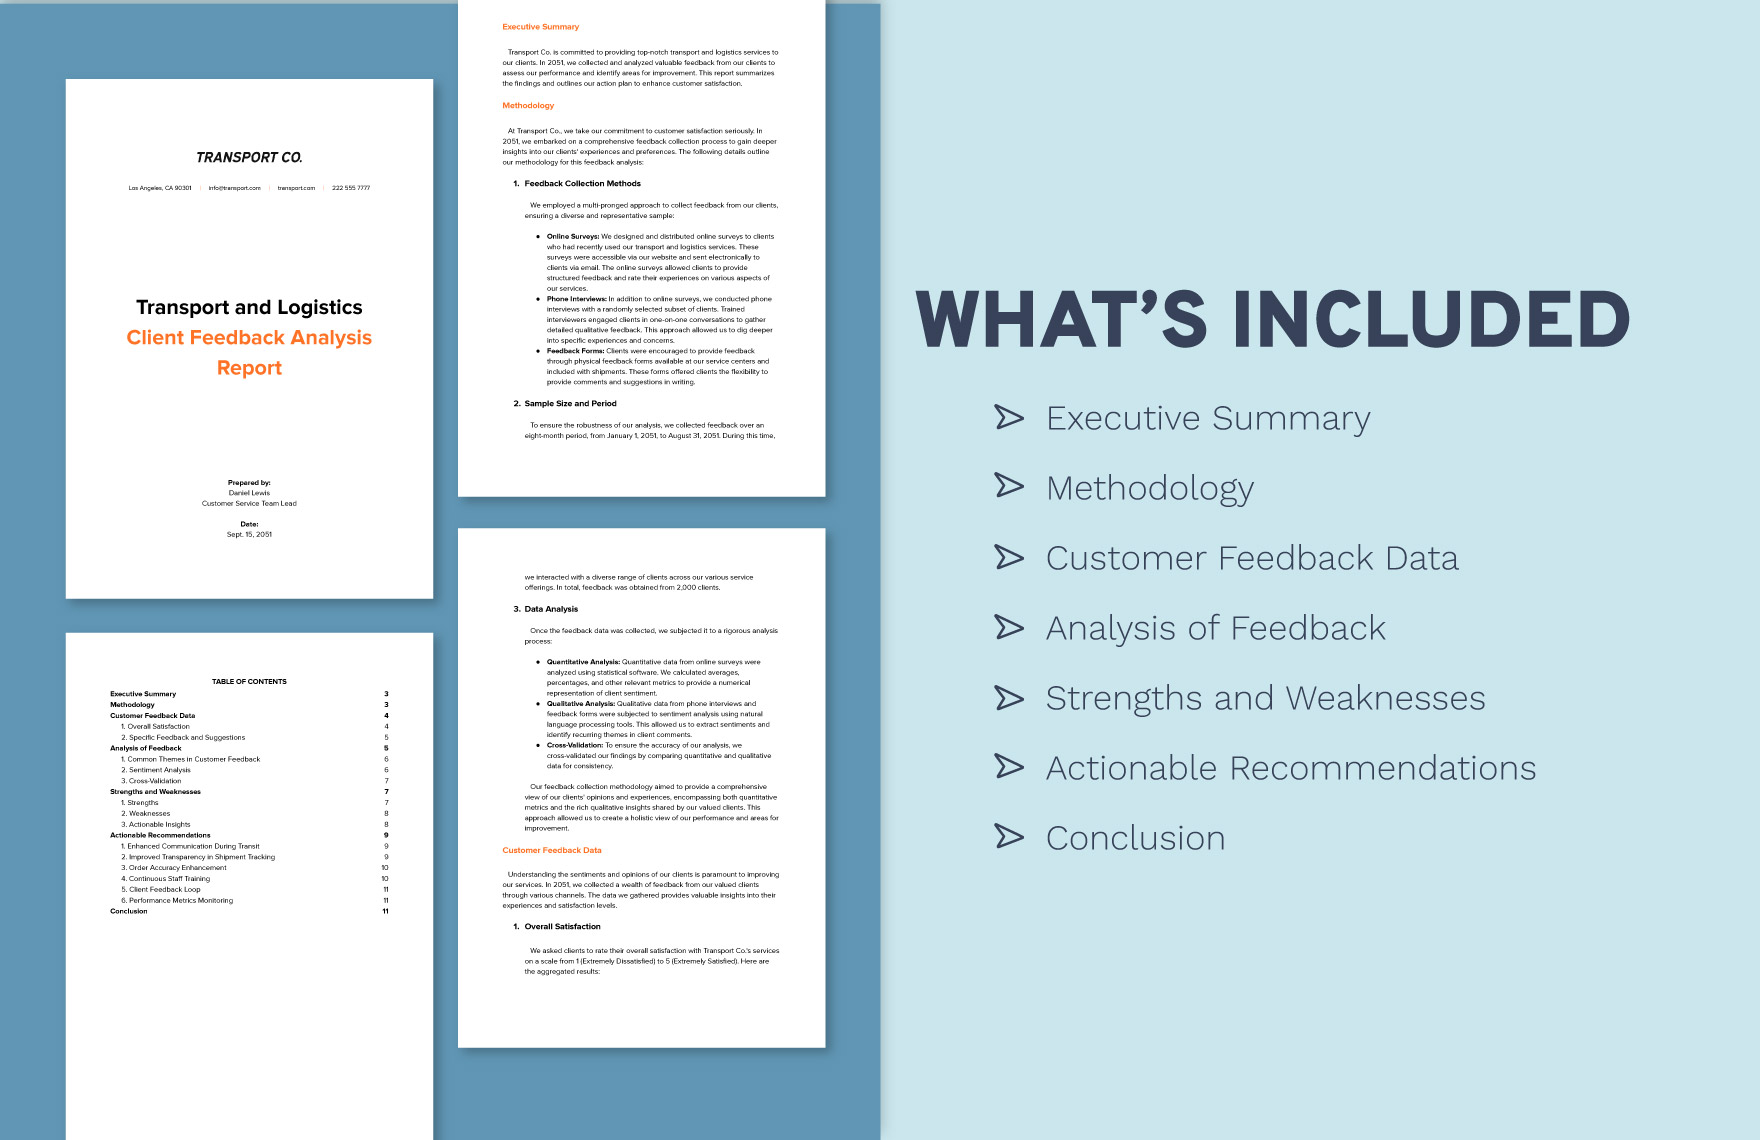 Transport and Logistics Client Feedback Analysis Report Template